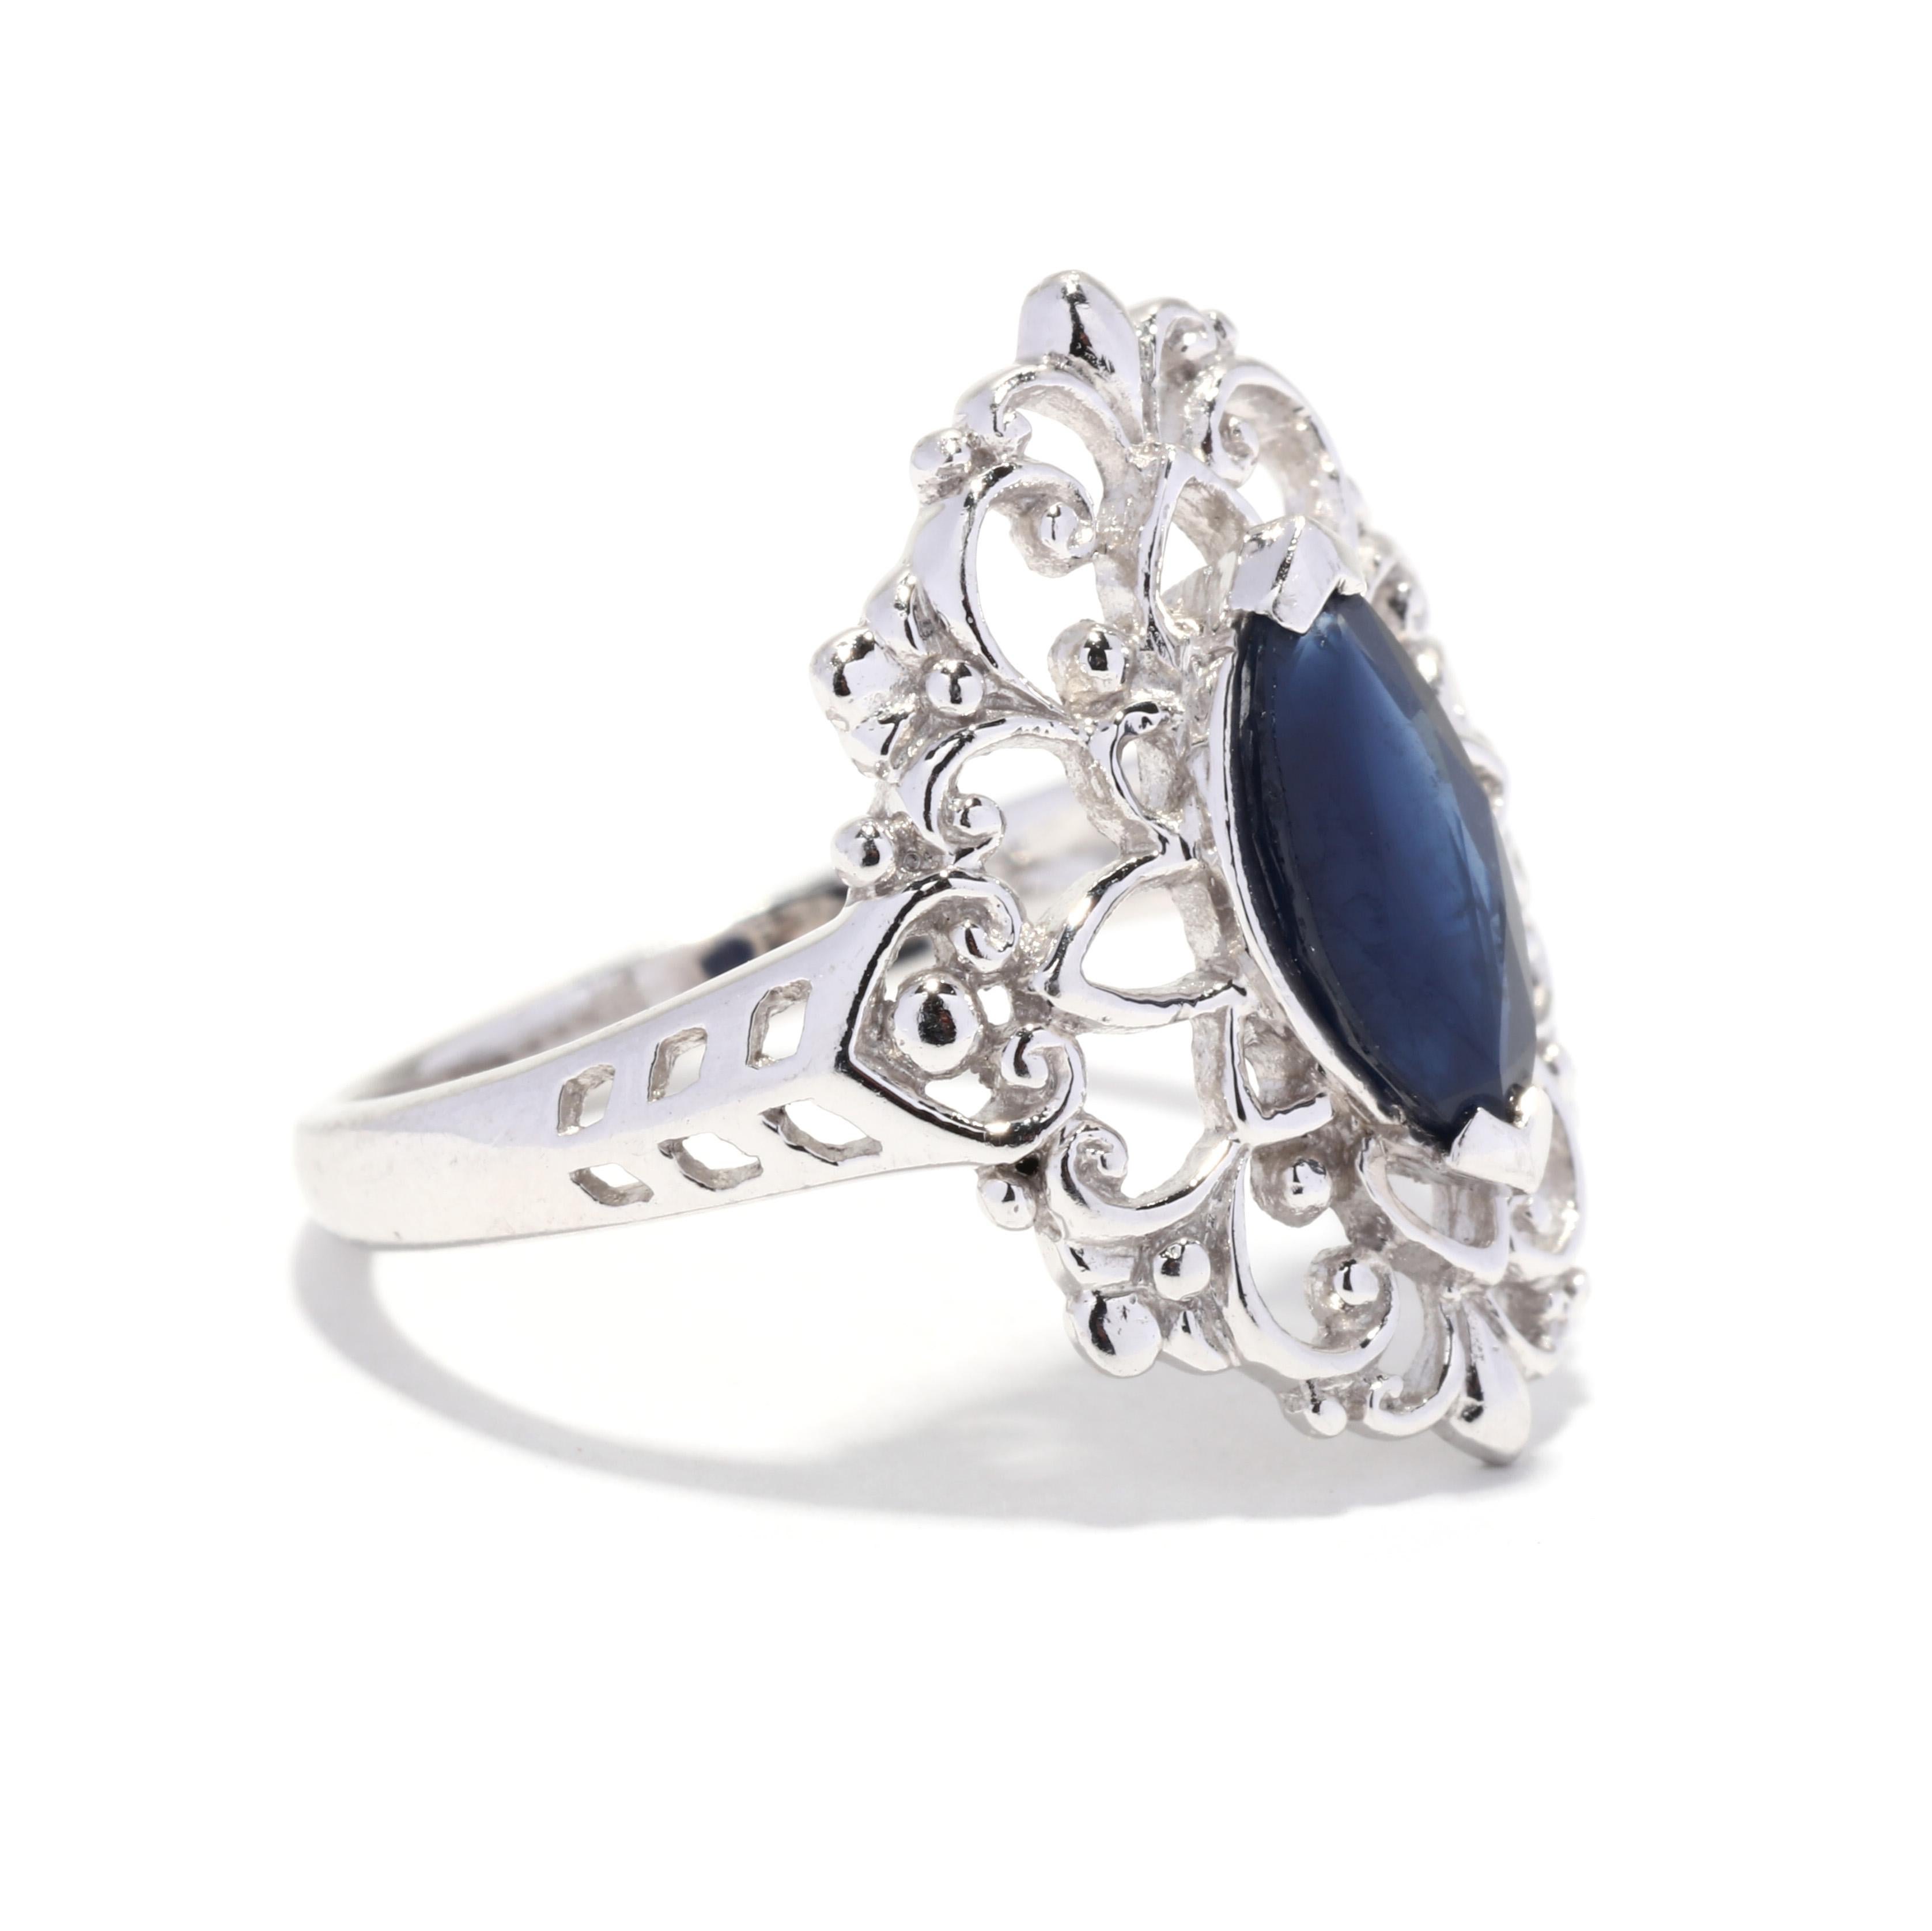 A vintage platinum natural blue sapphire filigree navette ring. This statement ring features a prong set, marquise cut sapphire weighing approximately 1.40 carat surrounded by a floral filigree design and with a tapered band.

Stones:
- sapphire, 1